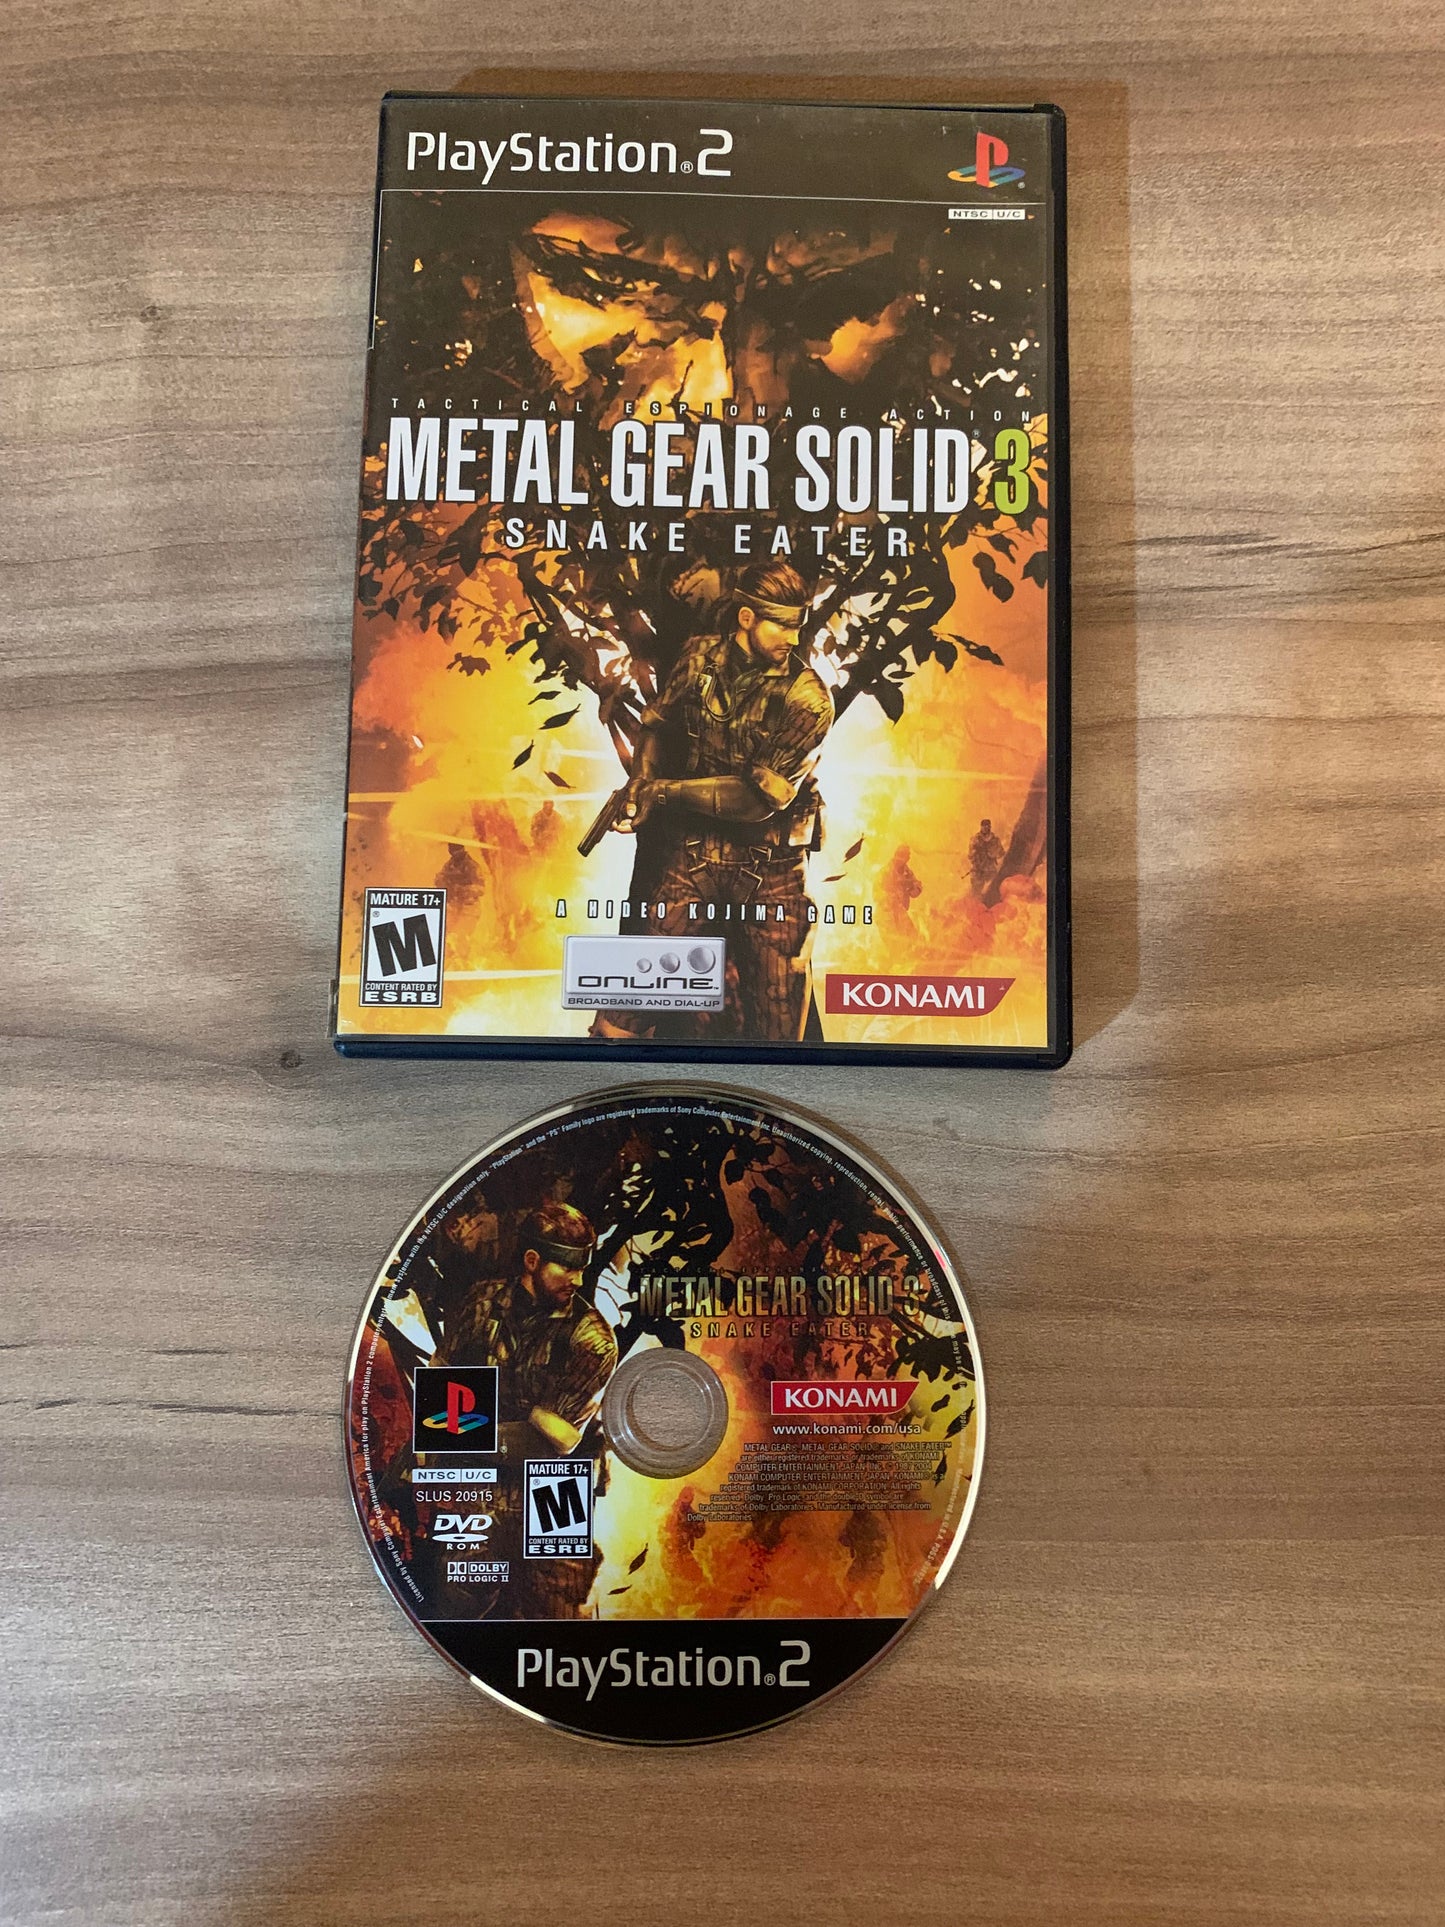 PiXEL-RETRO.COM : SONY PLAYSTATION 2 (PS2) COMPLET CIB BOX MANUAL GAME NTSC METAL GEAR SOLID 3 SNAKE EATER